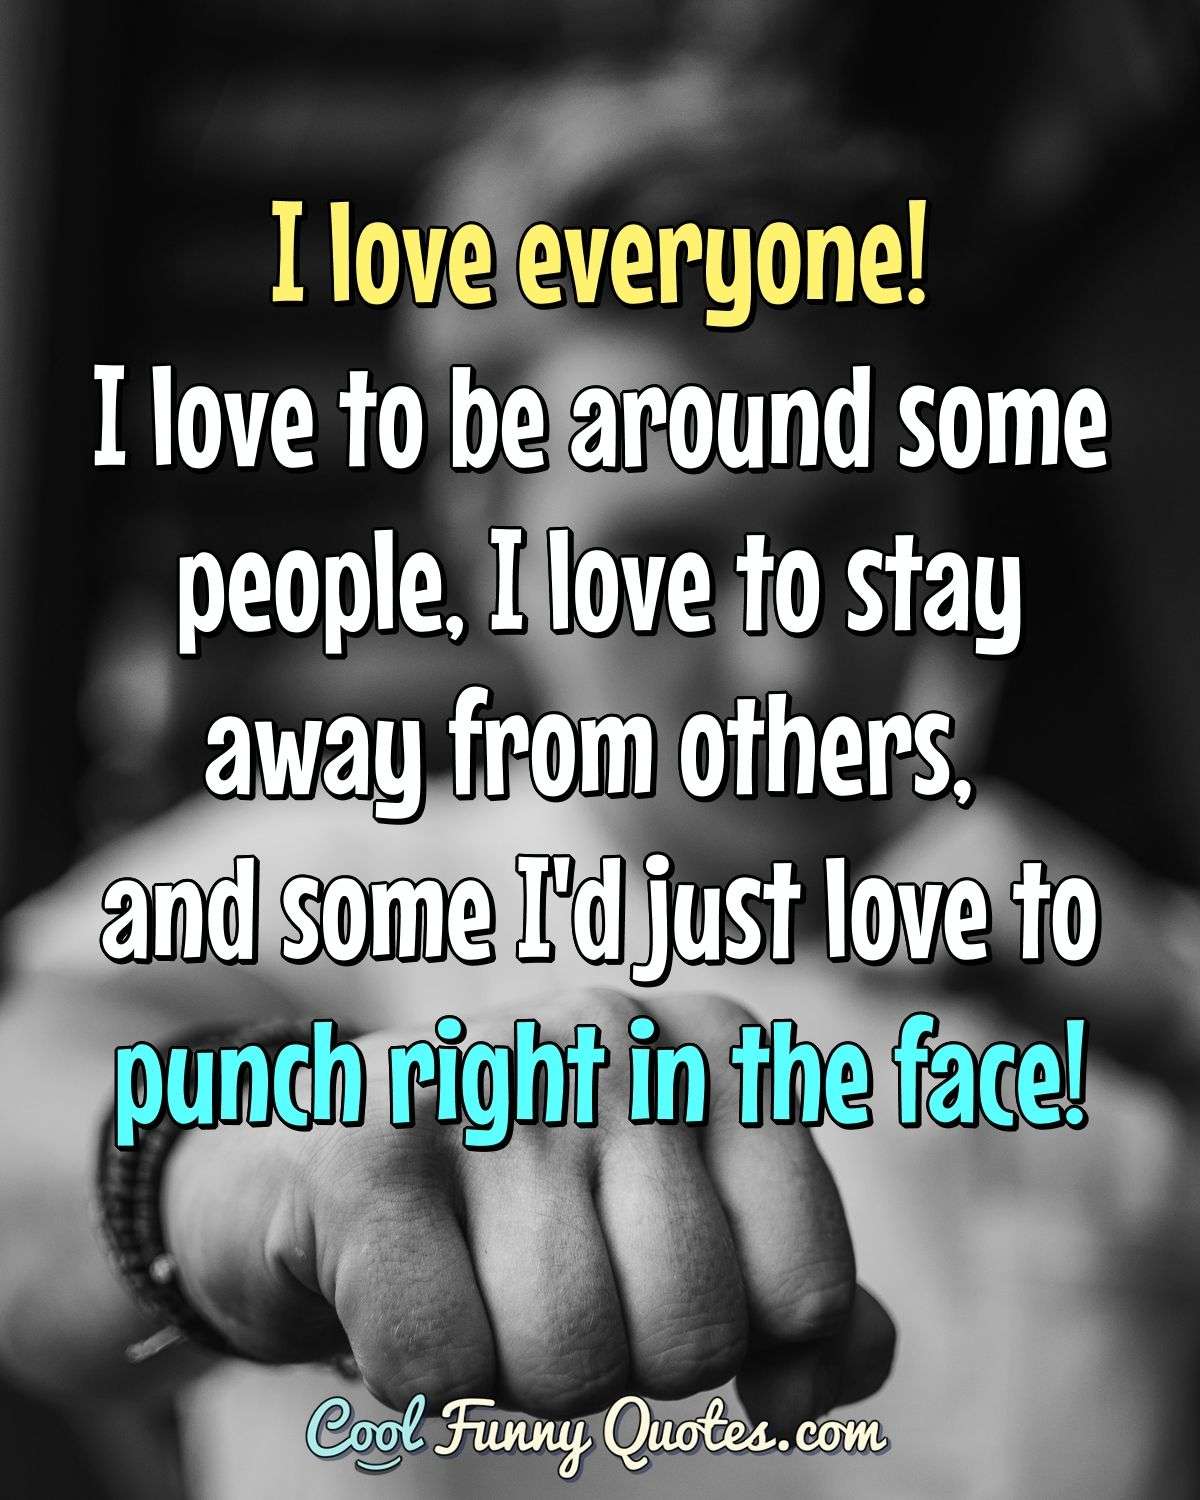 I love everyone!  I love to be around some people, I love to stay away from others, and some I'd just love to punch right in the face! - Anonymous